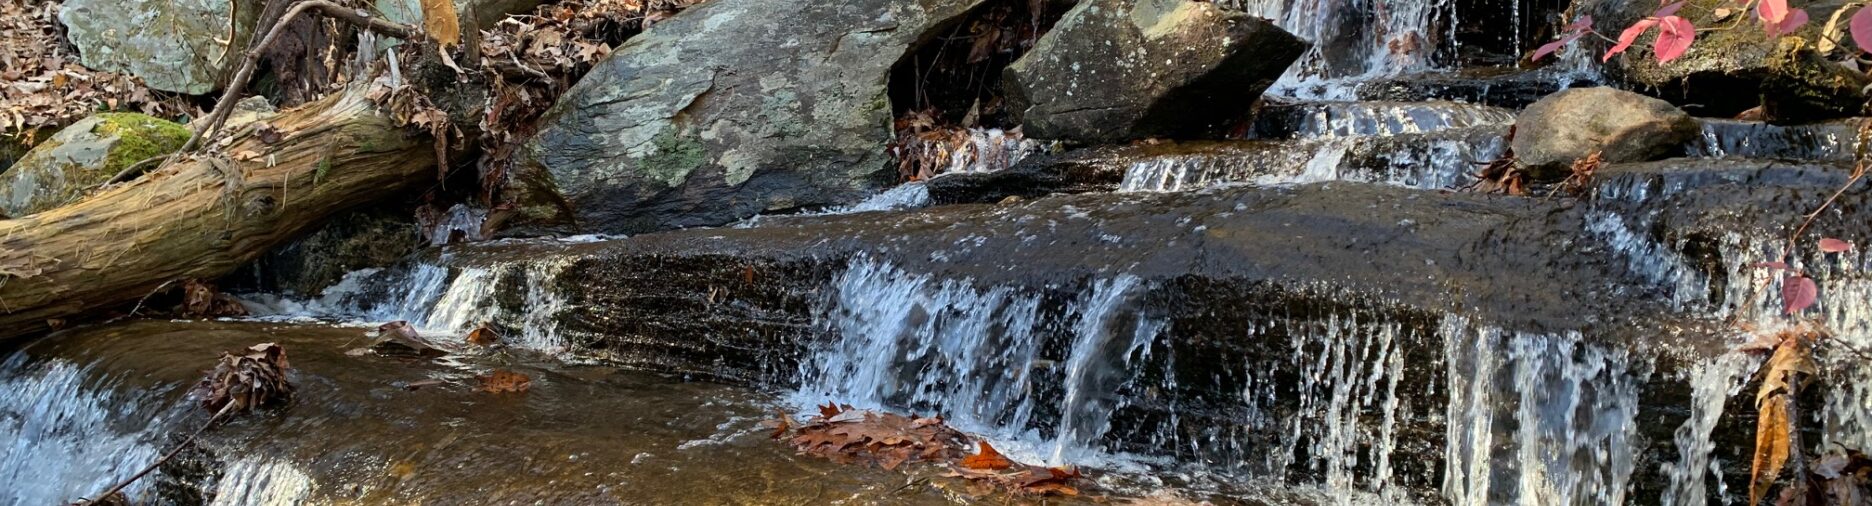 waterfall with rocks and autumn leaves